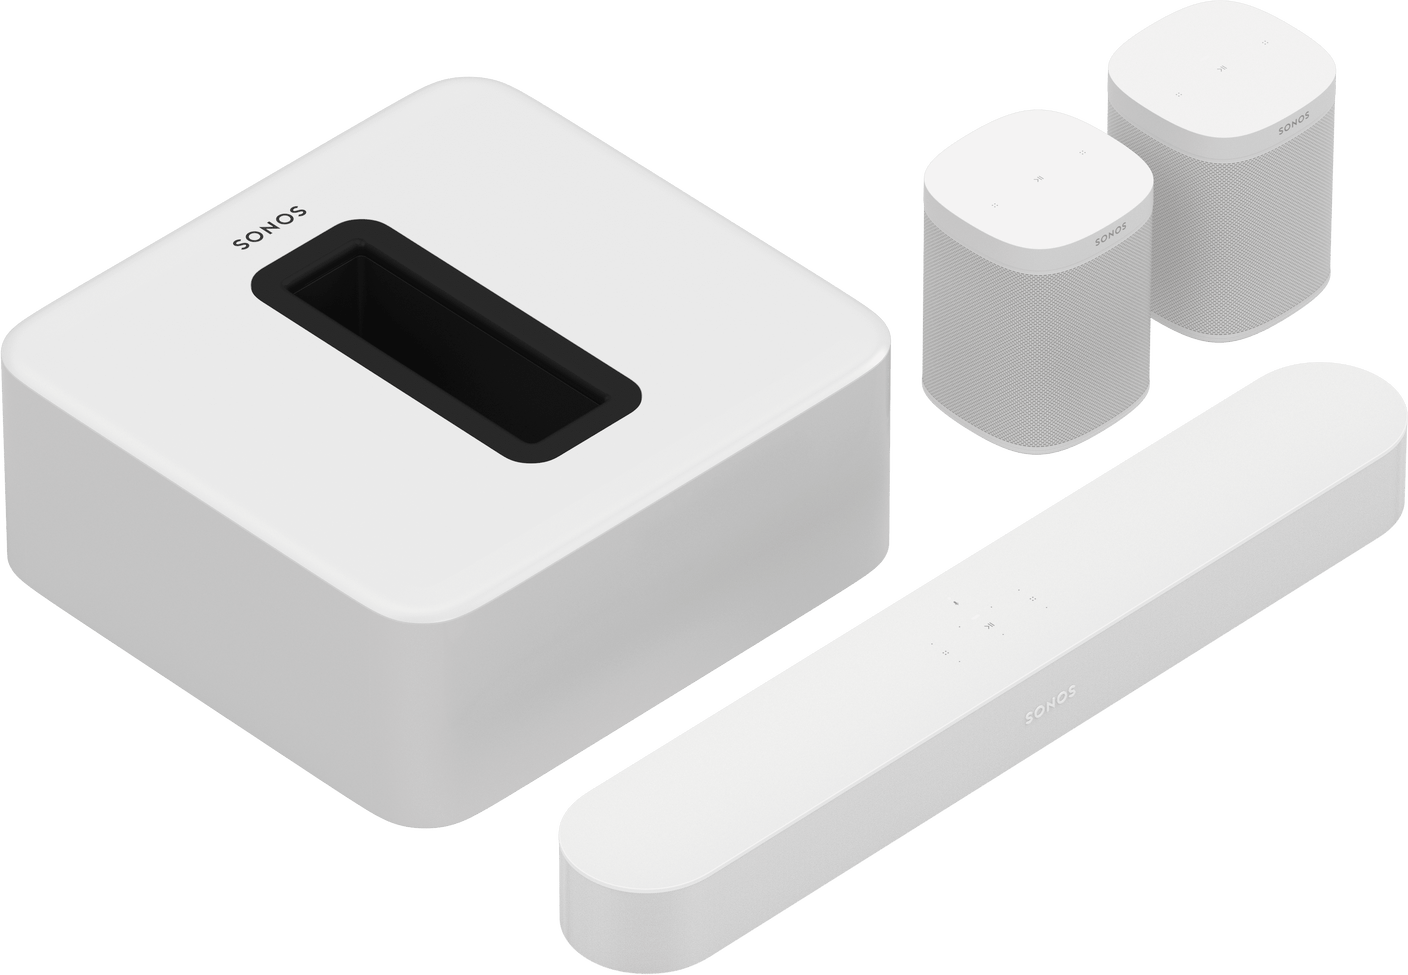 Sonos Immersive Pack with Beam